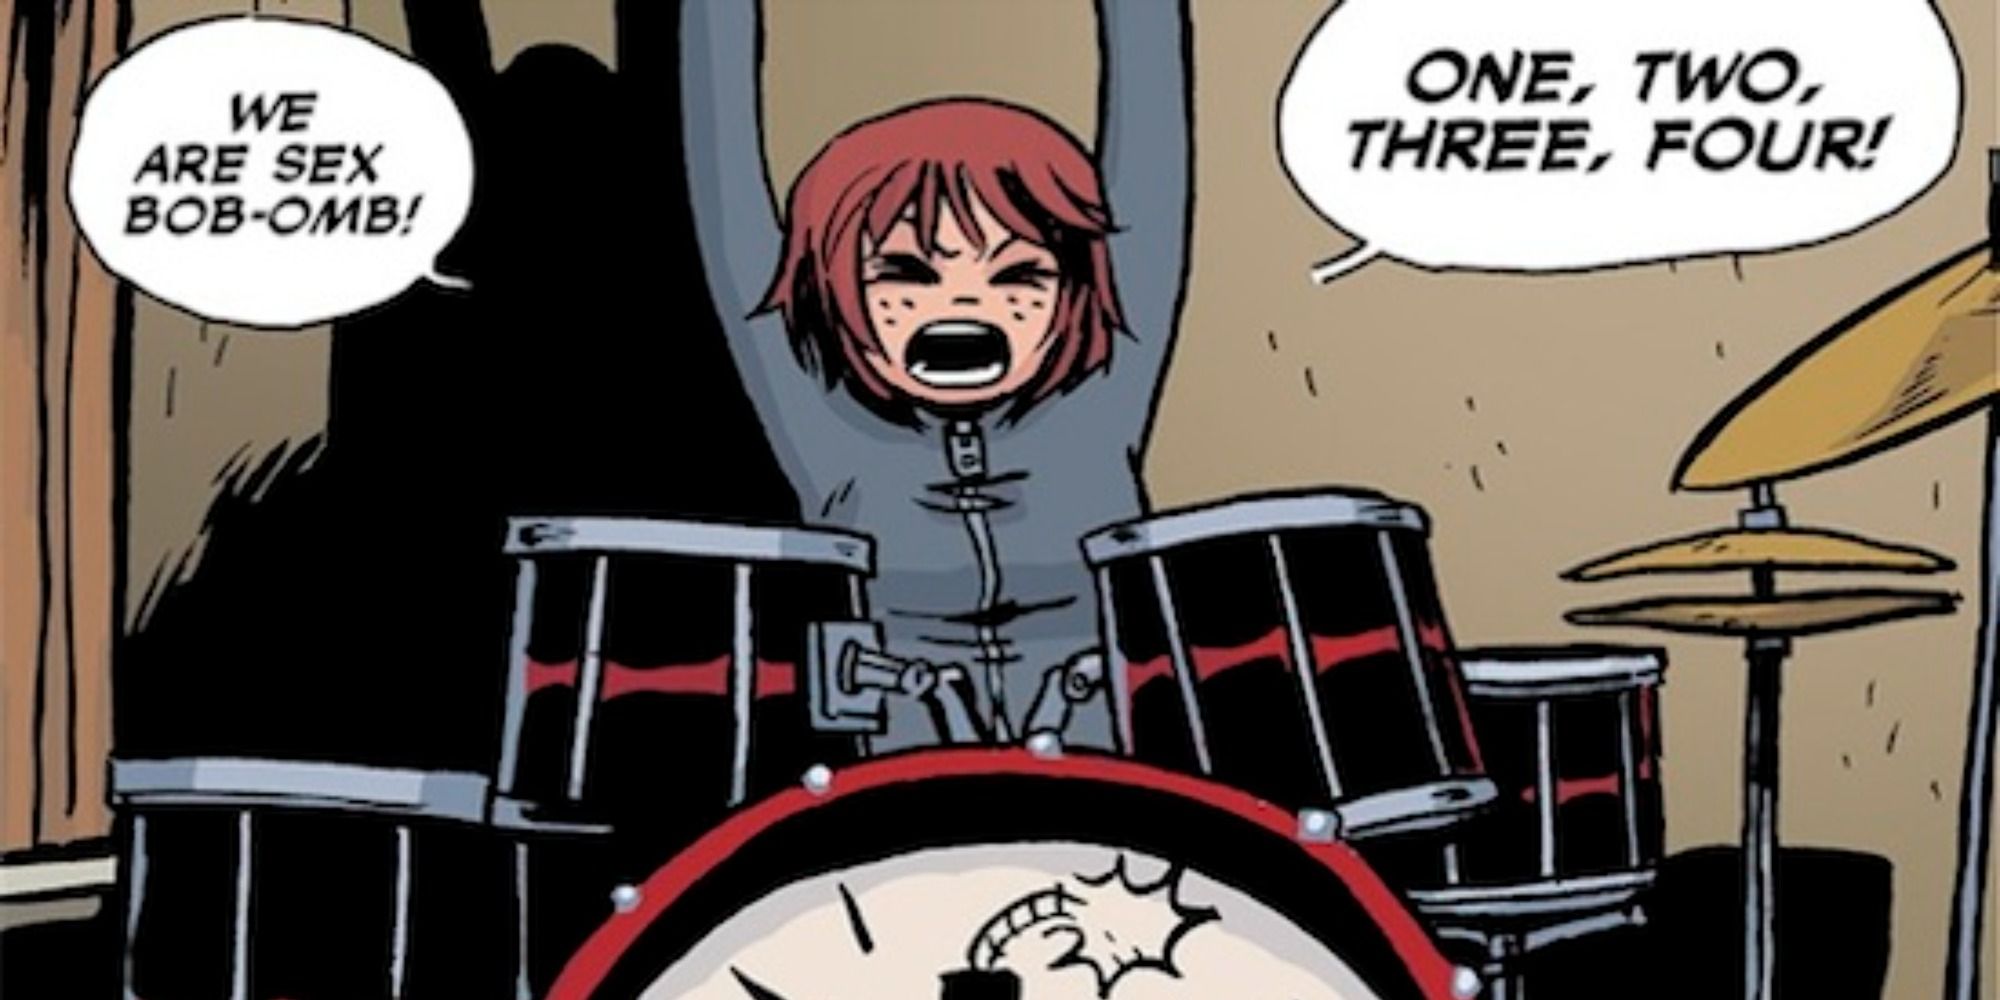 Kim Pine counts off before Sex Bob-Omb plays in Brian Lee O'Malley's Scott Pilgrim